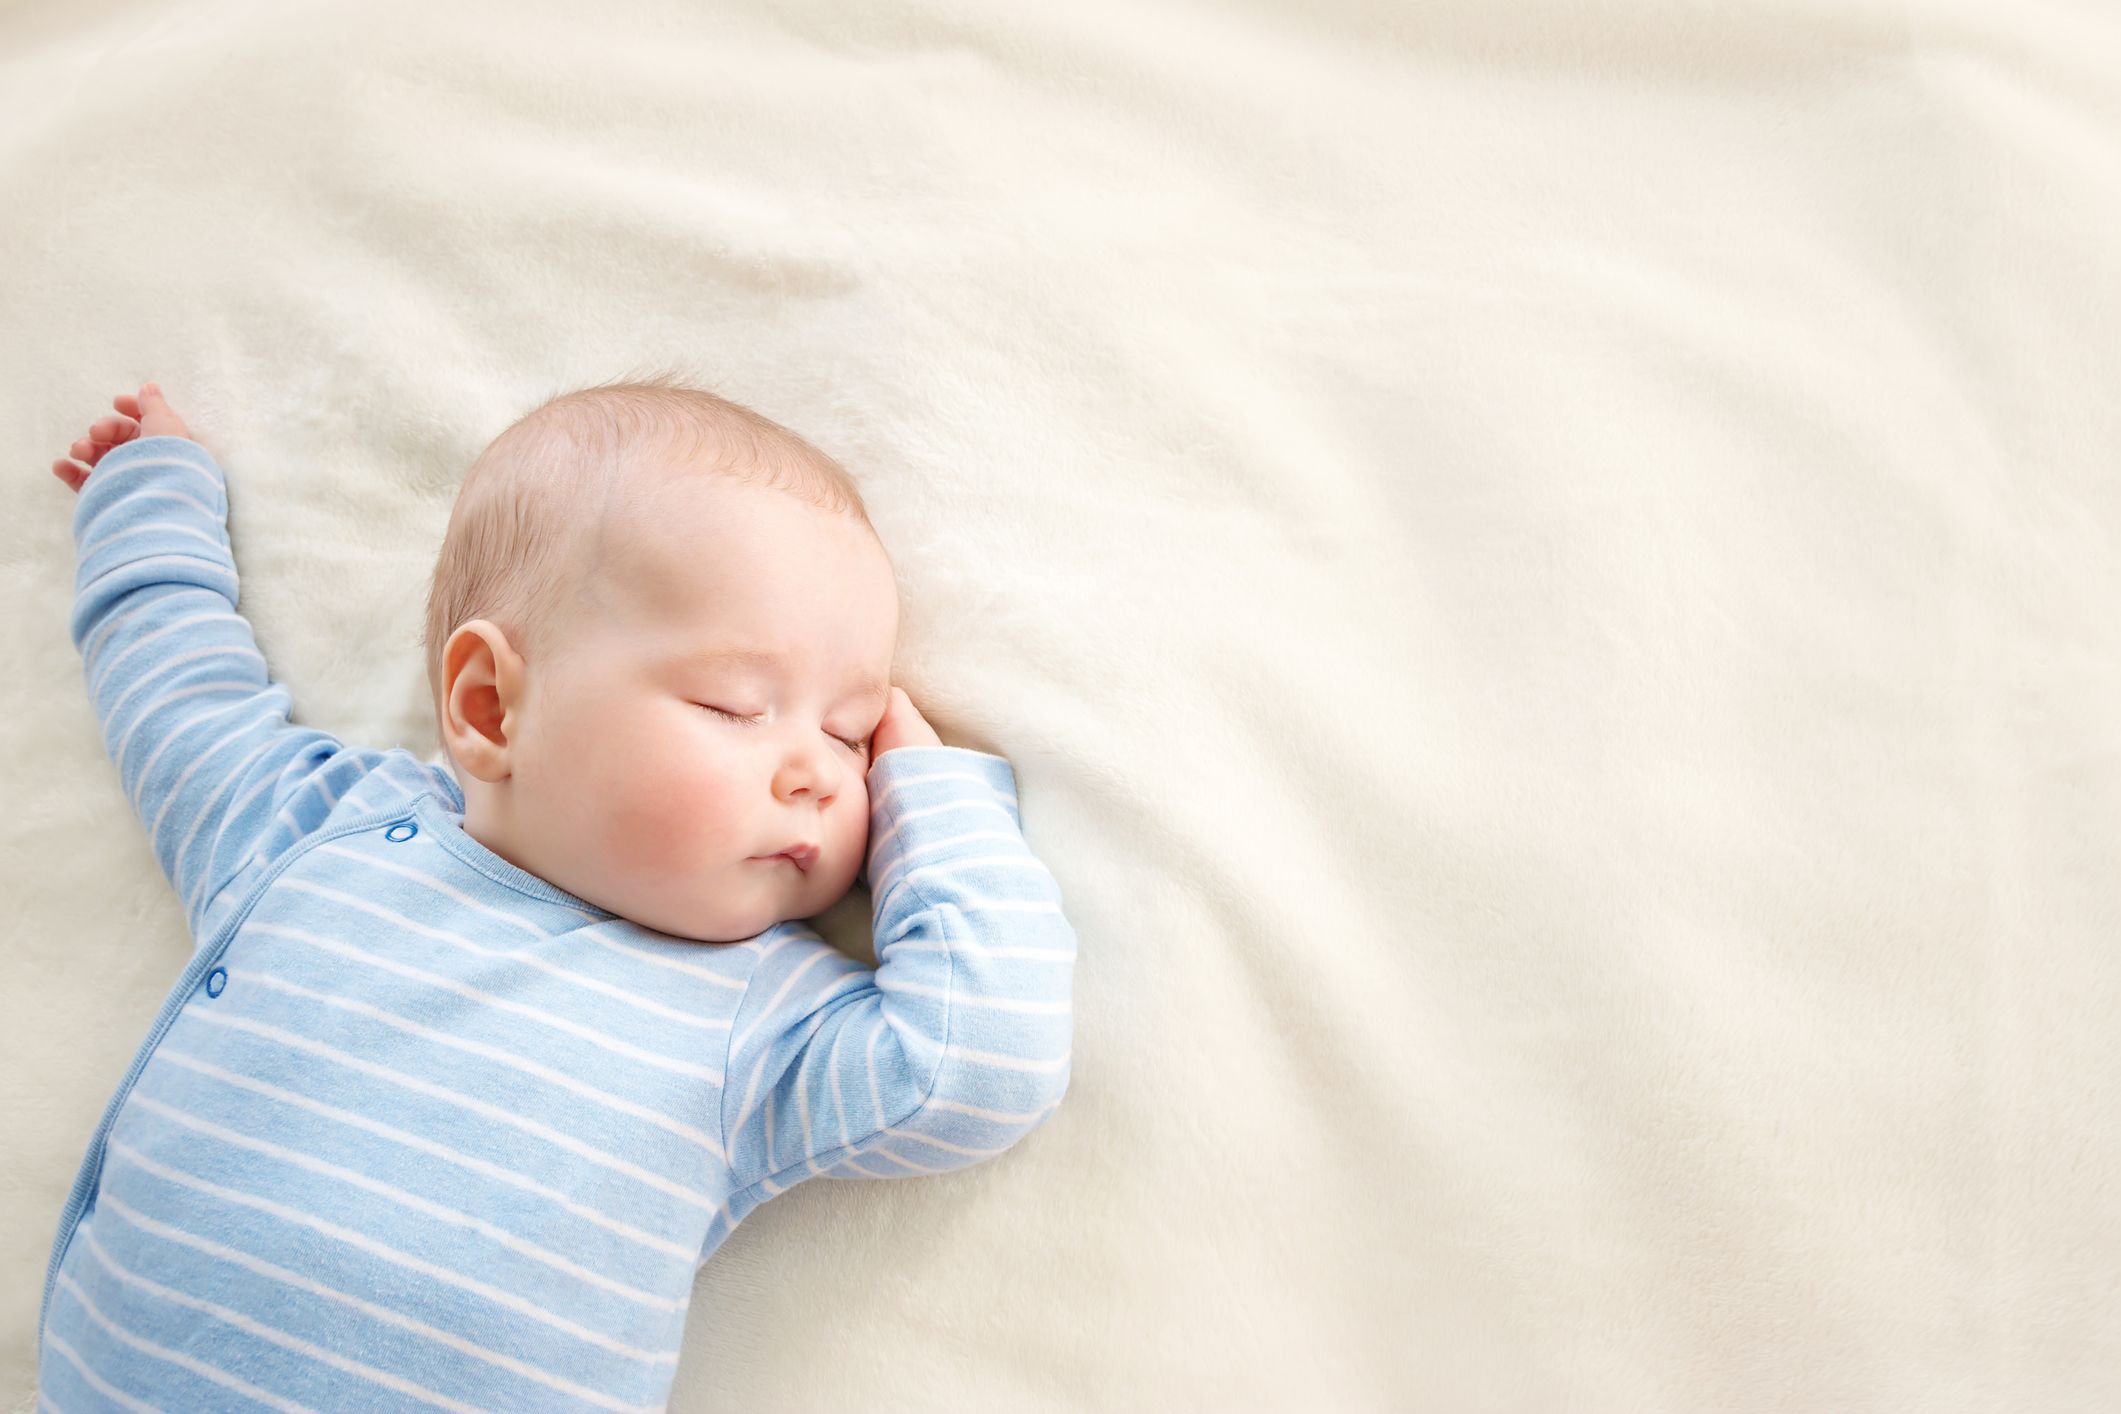 Cotton crib sheets are best for baby